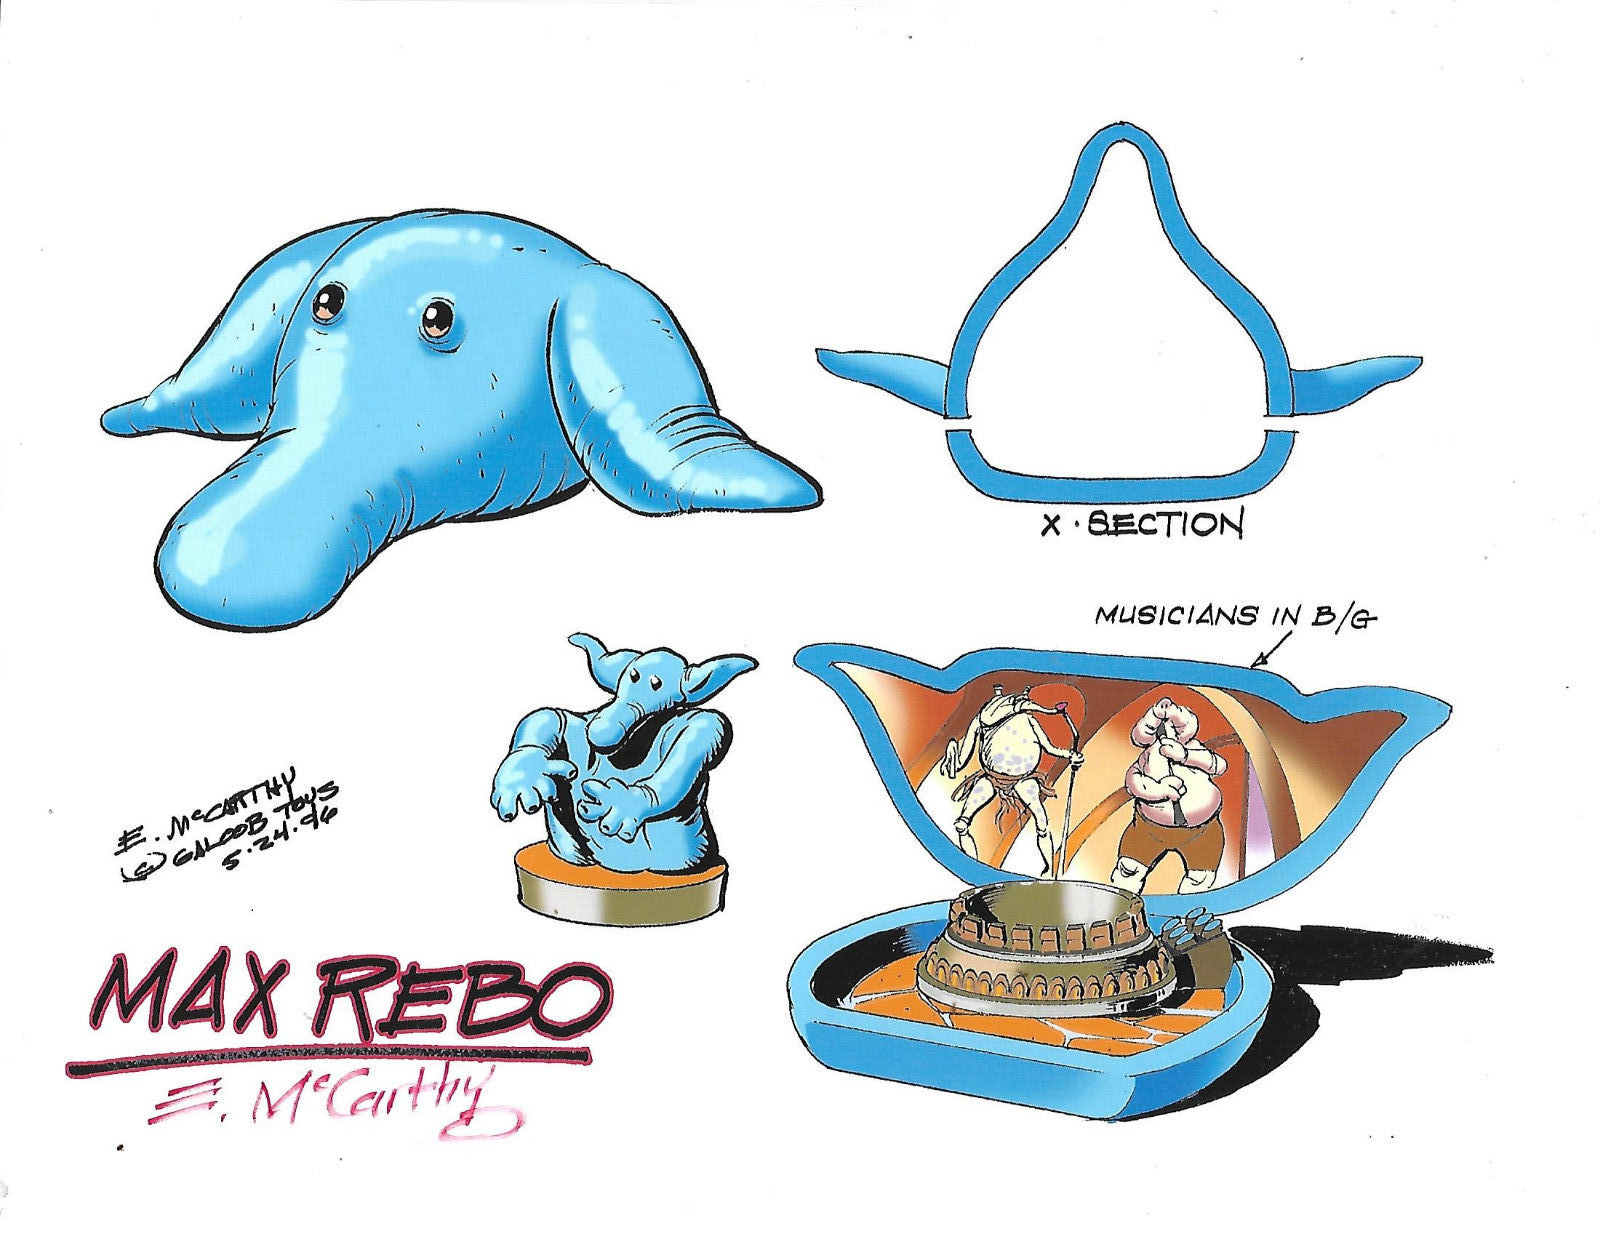 STAR WARS Max Rebo with Musicians GALOOB Micro Machines Playset E McCarthy